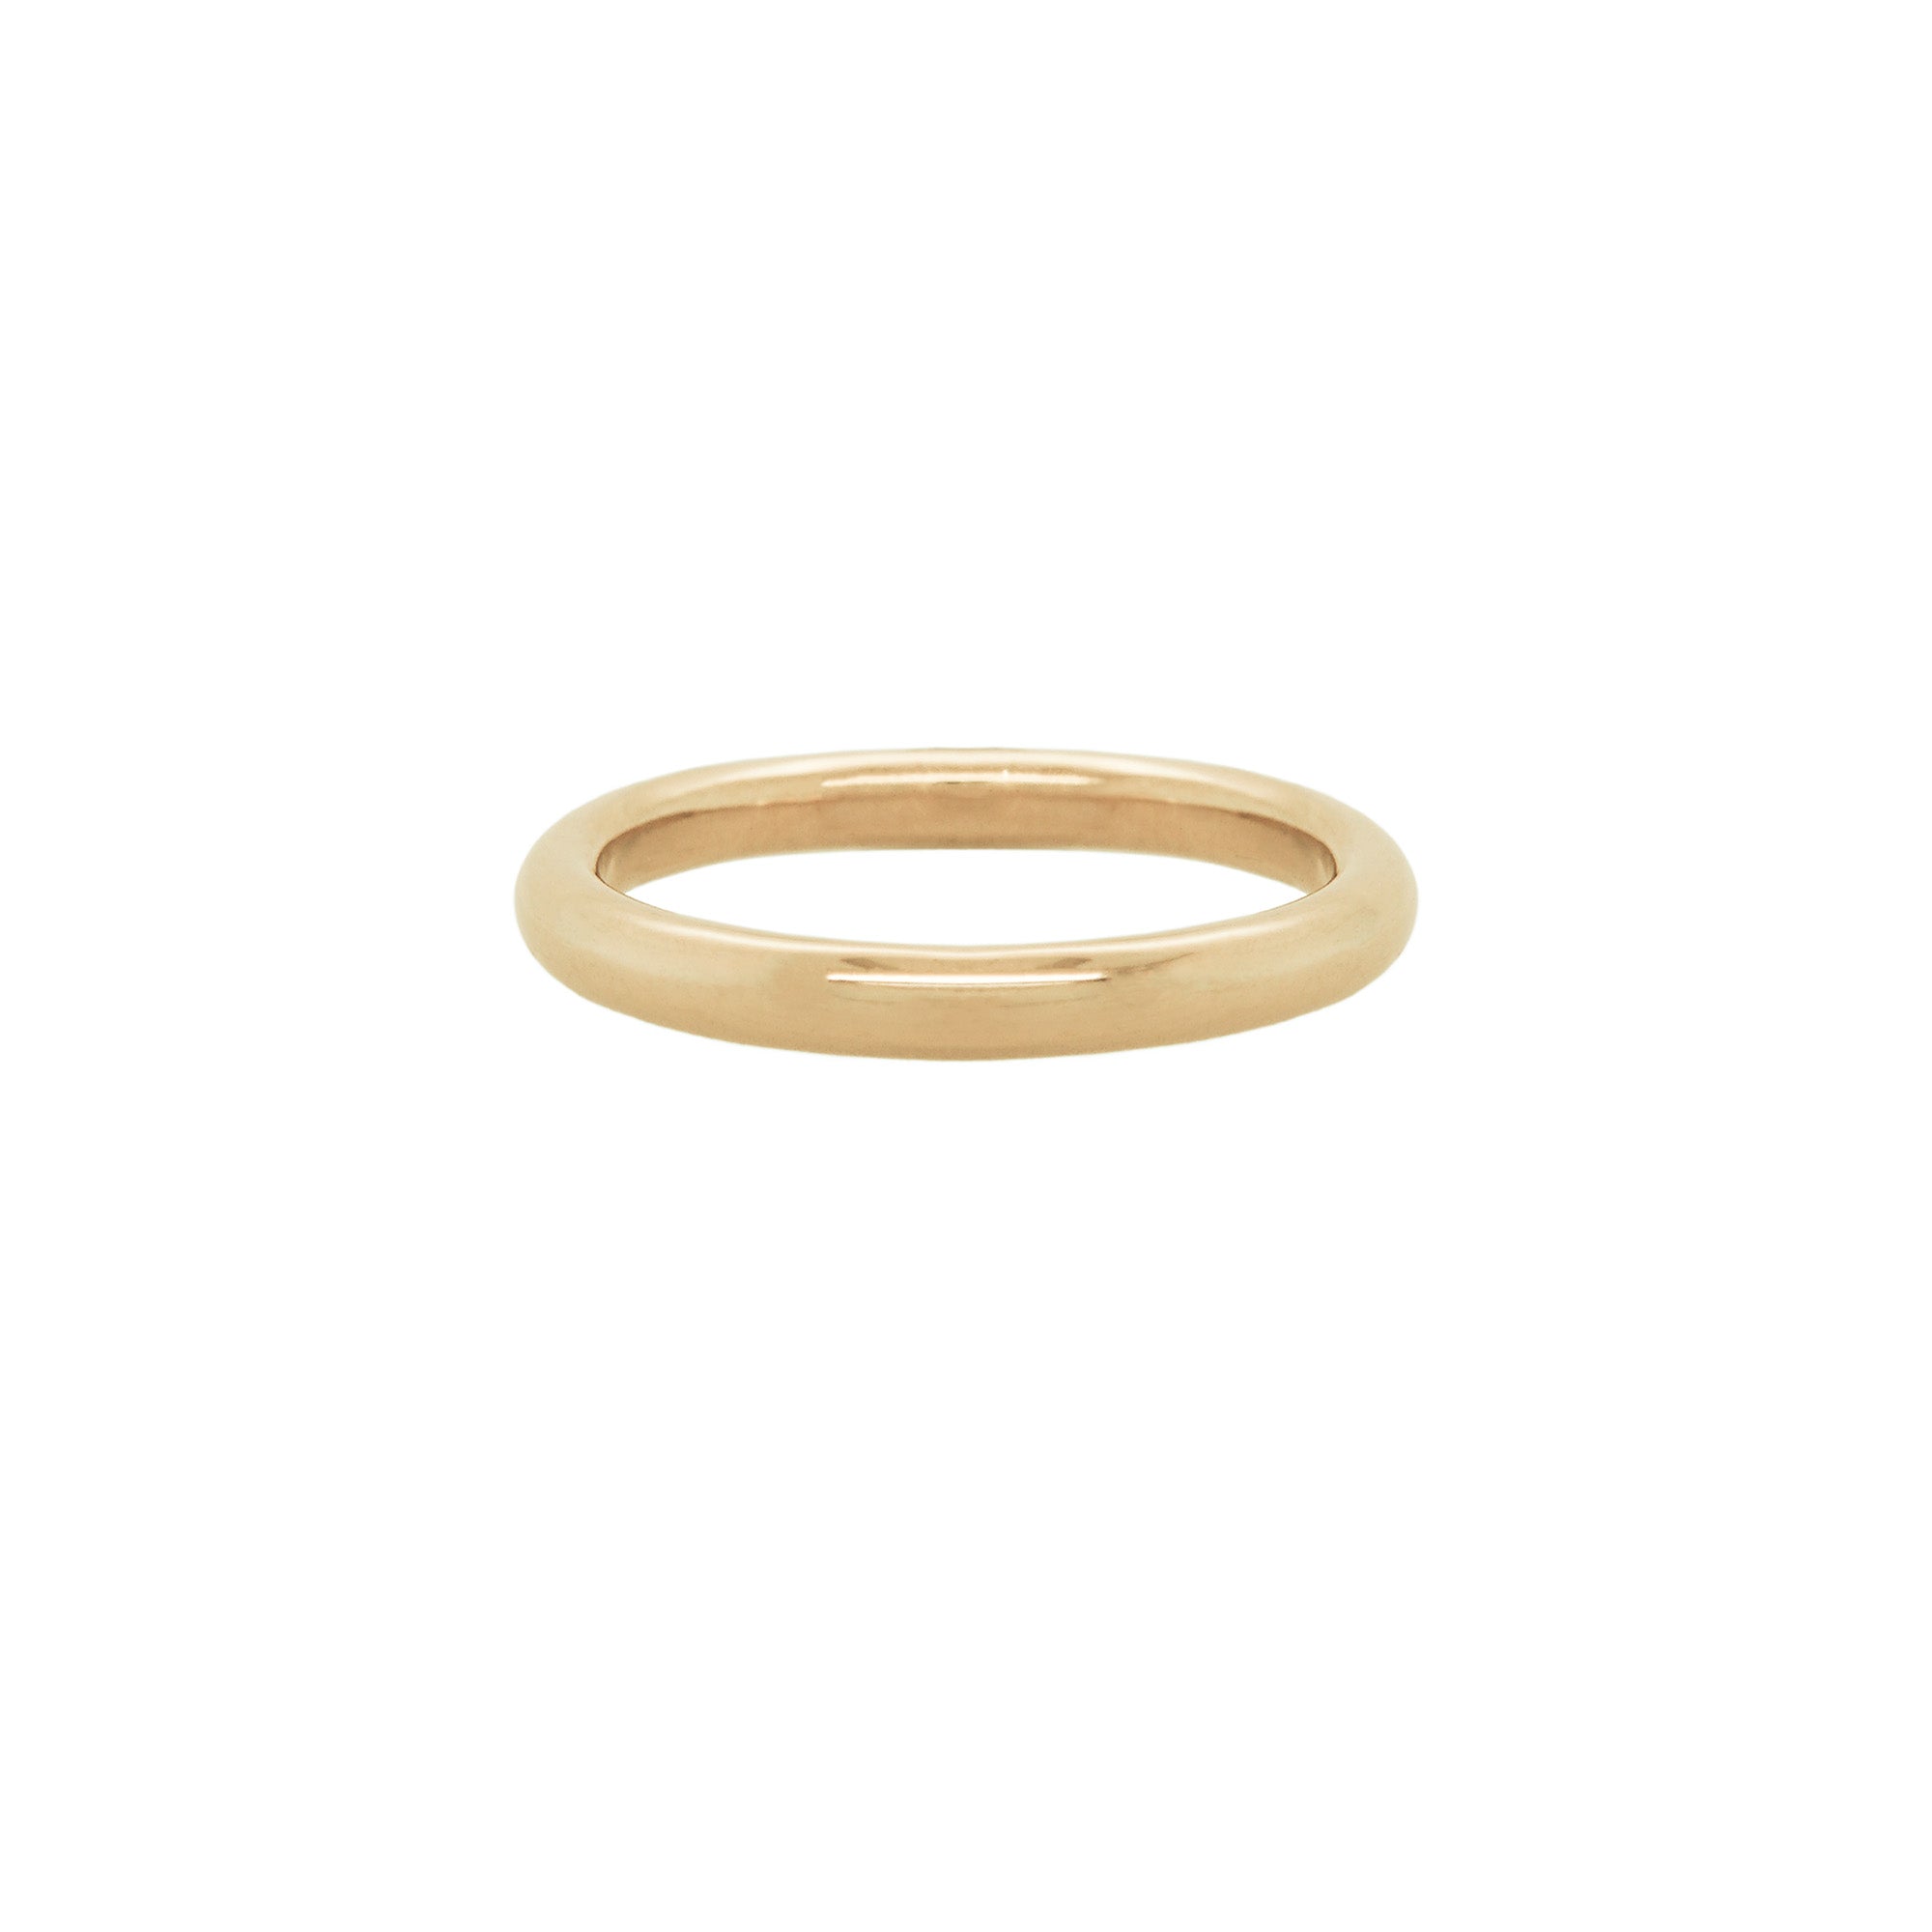 A stock photo of Laurie Fleming Jewellery's plain solid gold "Peach" band, a 2.1mm wide round wire stacking ring/wedding band, handmade in Toronto. The ring is on a white background.